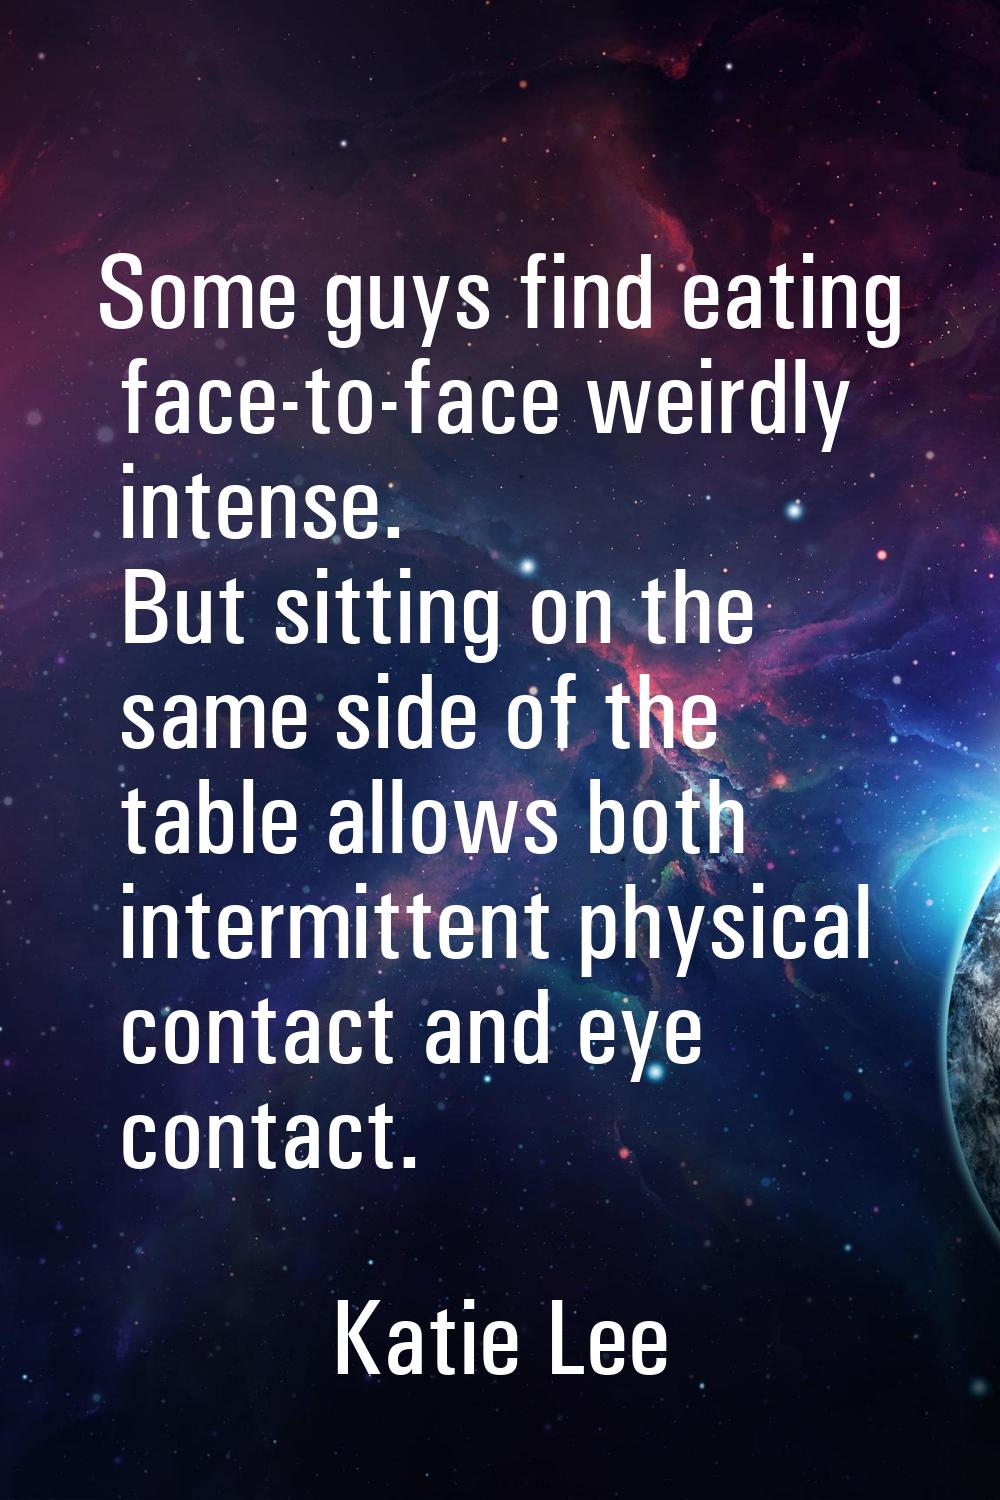 Some guys find eating face-to-face weirdly intense. But sitting on the same side of the table allow